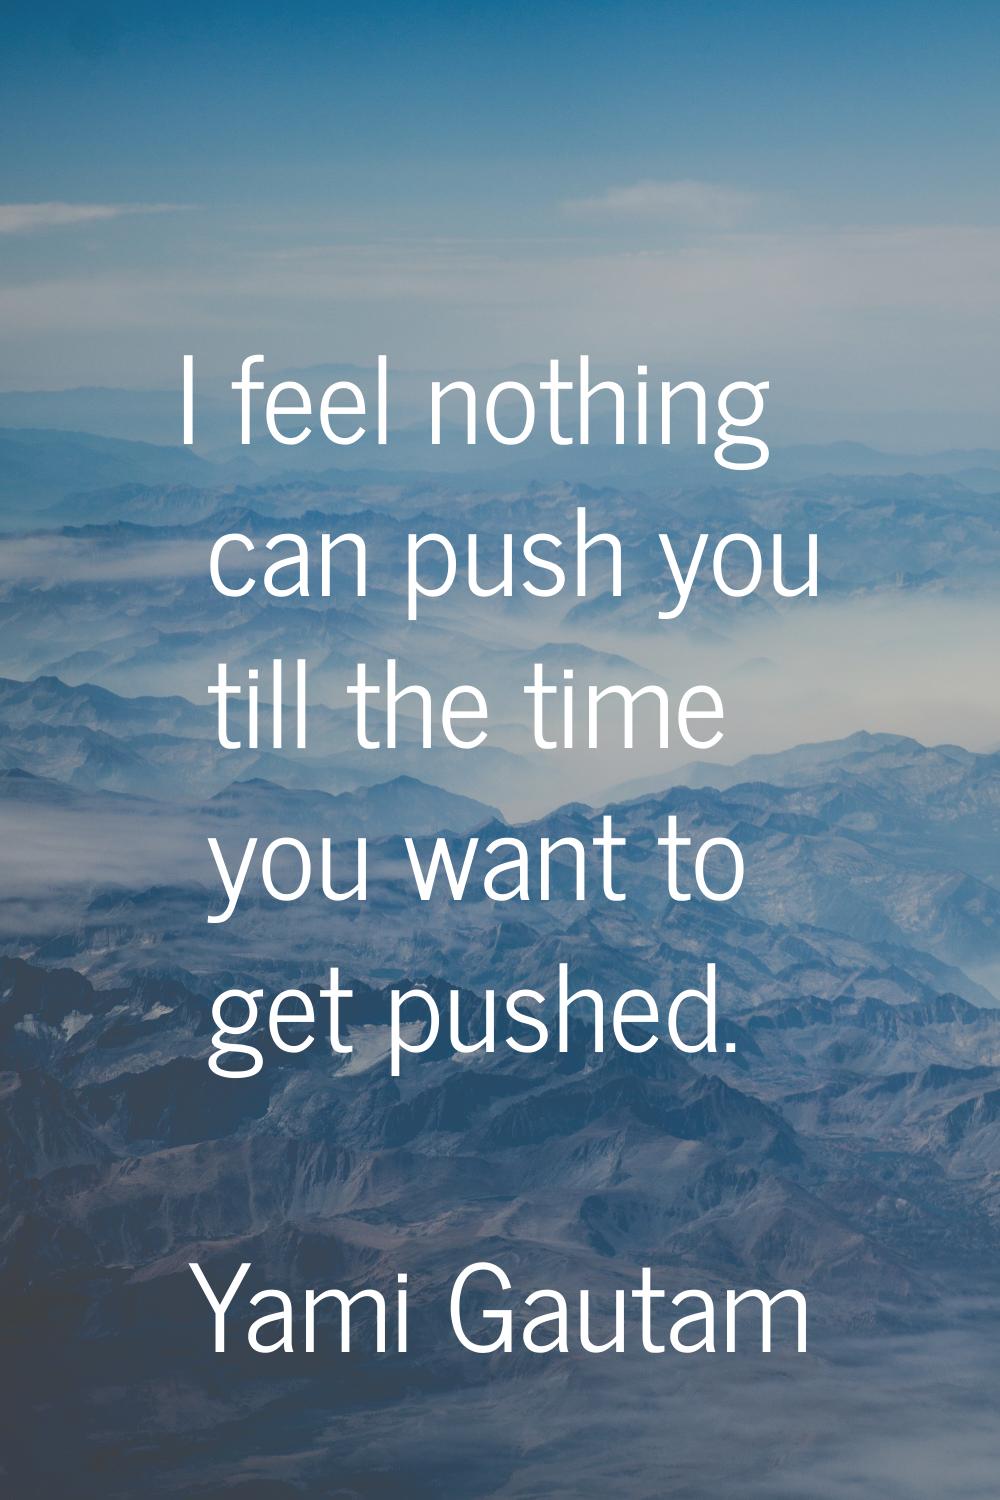 I feel nothing can push you till the time you want to get pushed.